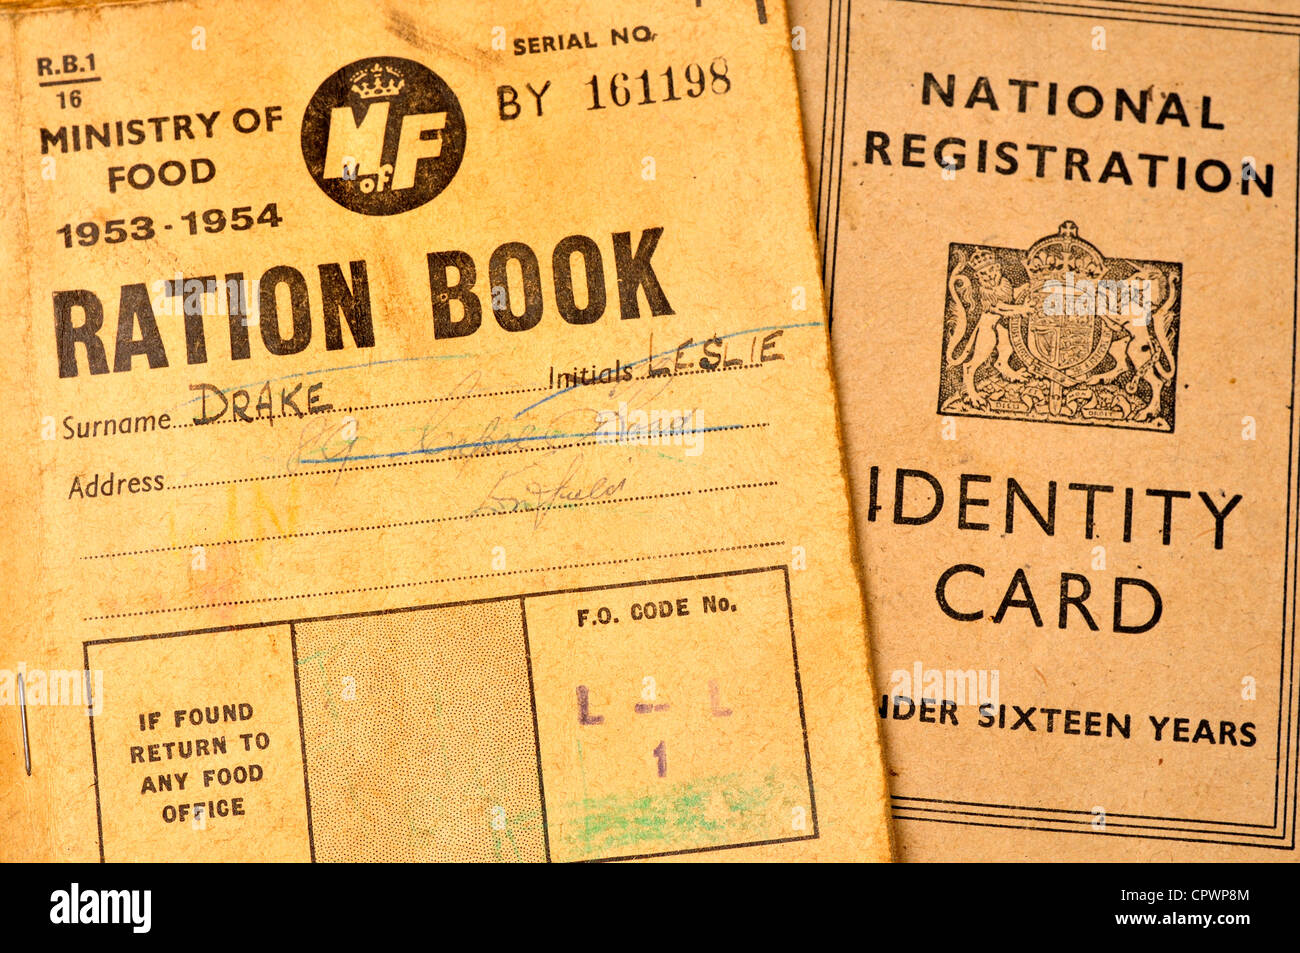 Id Card High Resolution Stock Photography and Images - Alamy With World War 2 Identity Card Template